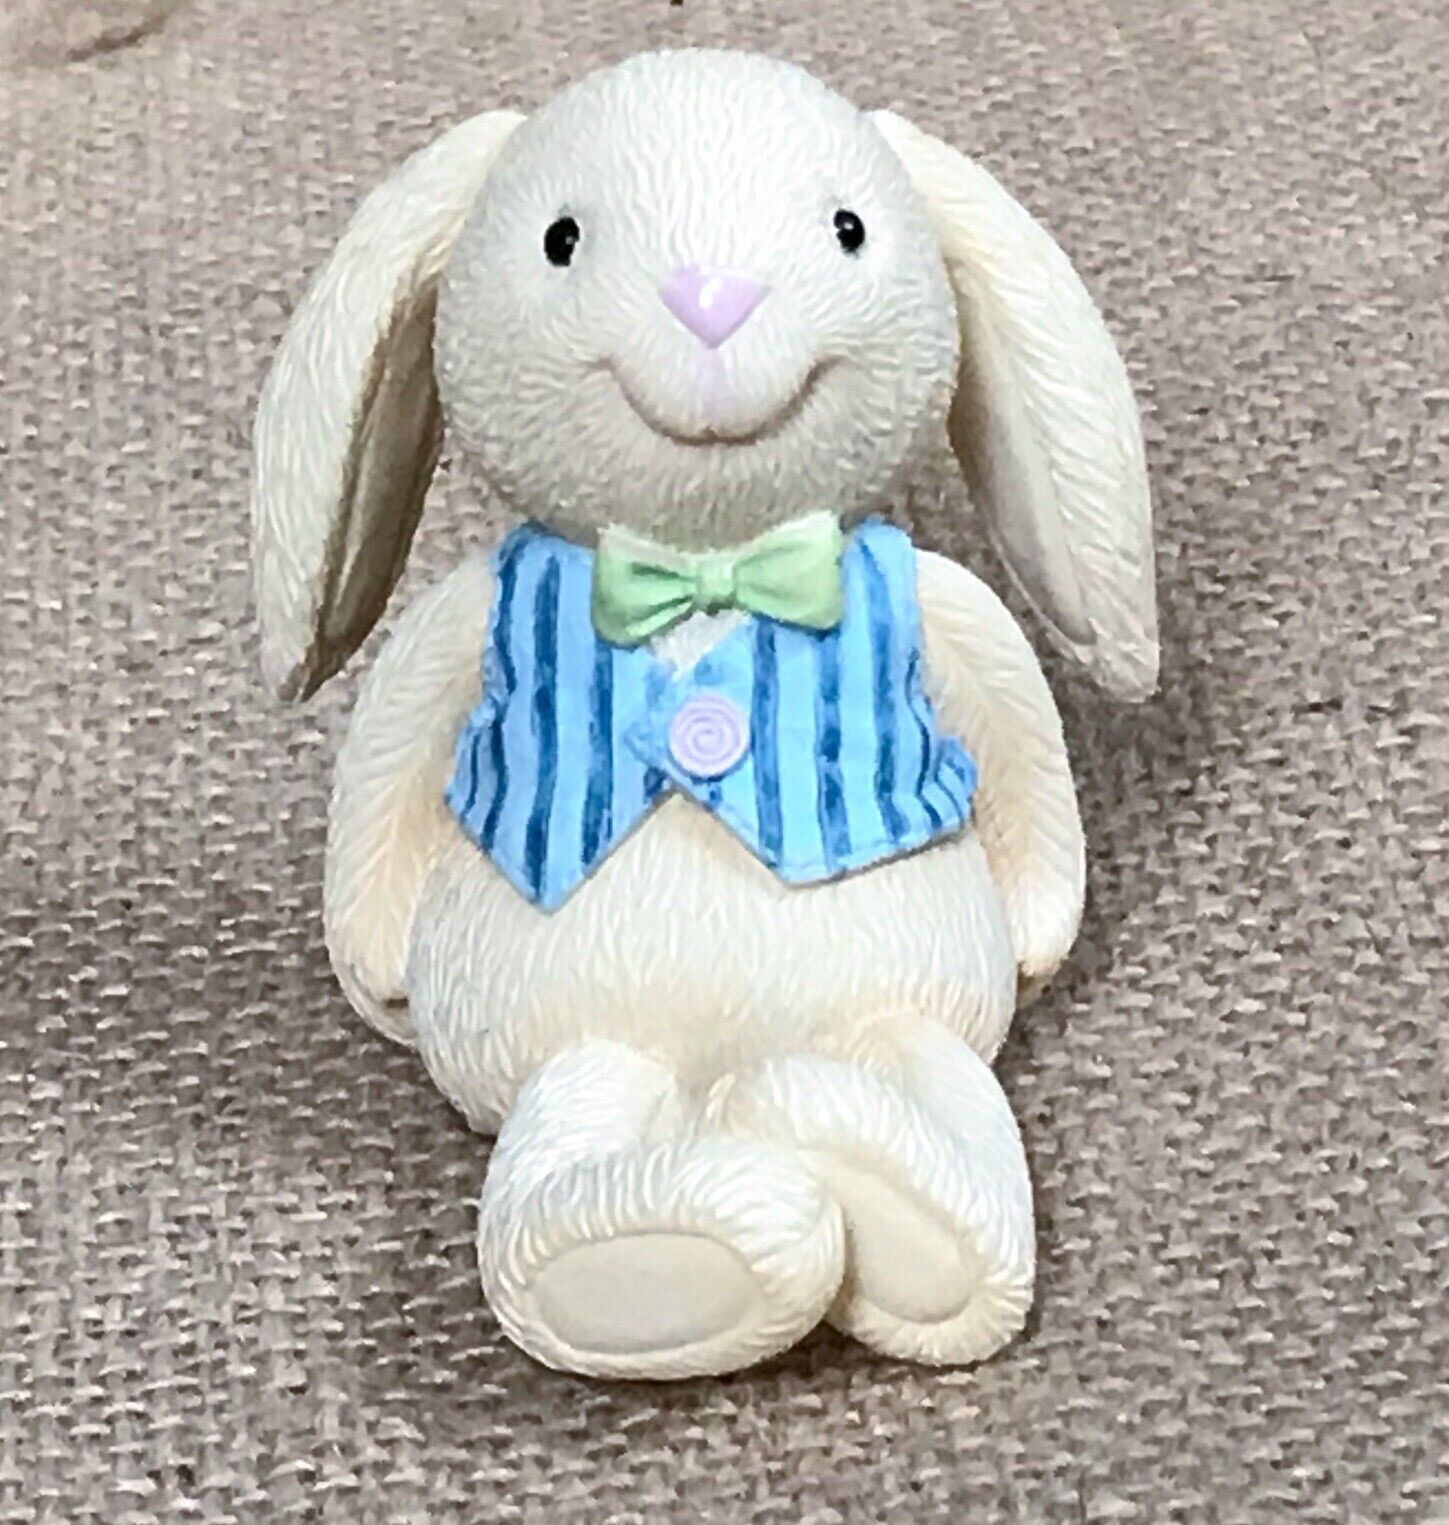 1 3/4 Inch Resin Sitting Lop Eared Bunny Rabbit In Vest Figurine Easter Kitsch